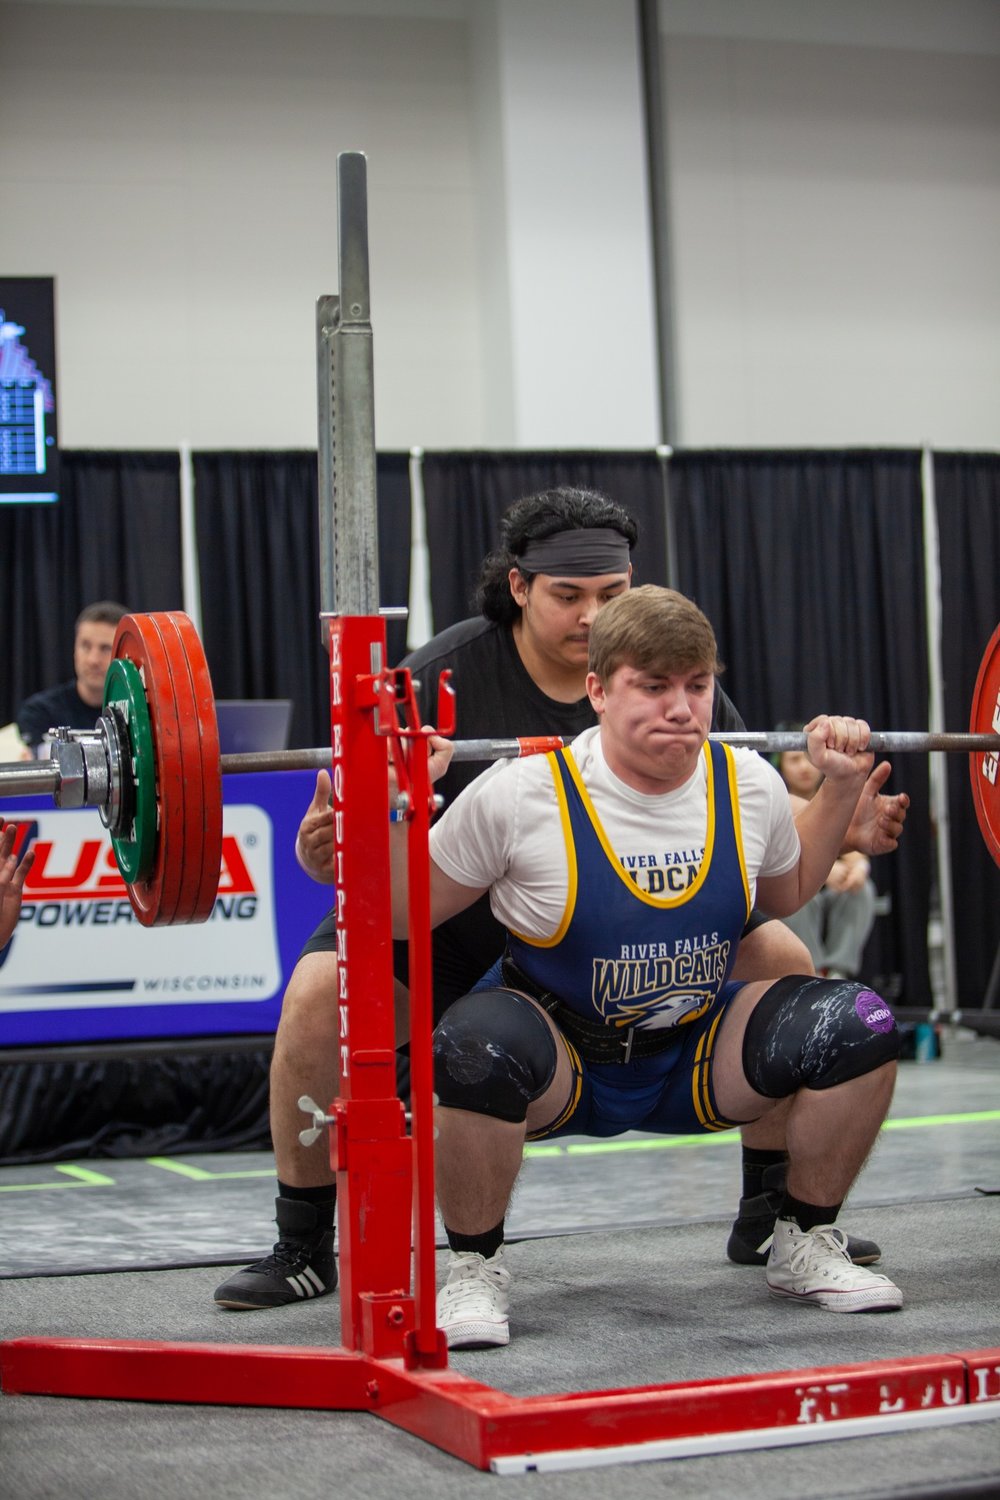 One of nearly 70 River Falls High School students involved with the powerlifting team gets parallel during a squat repetition in a meet earlier this season.